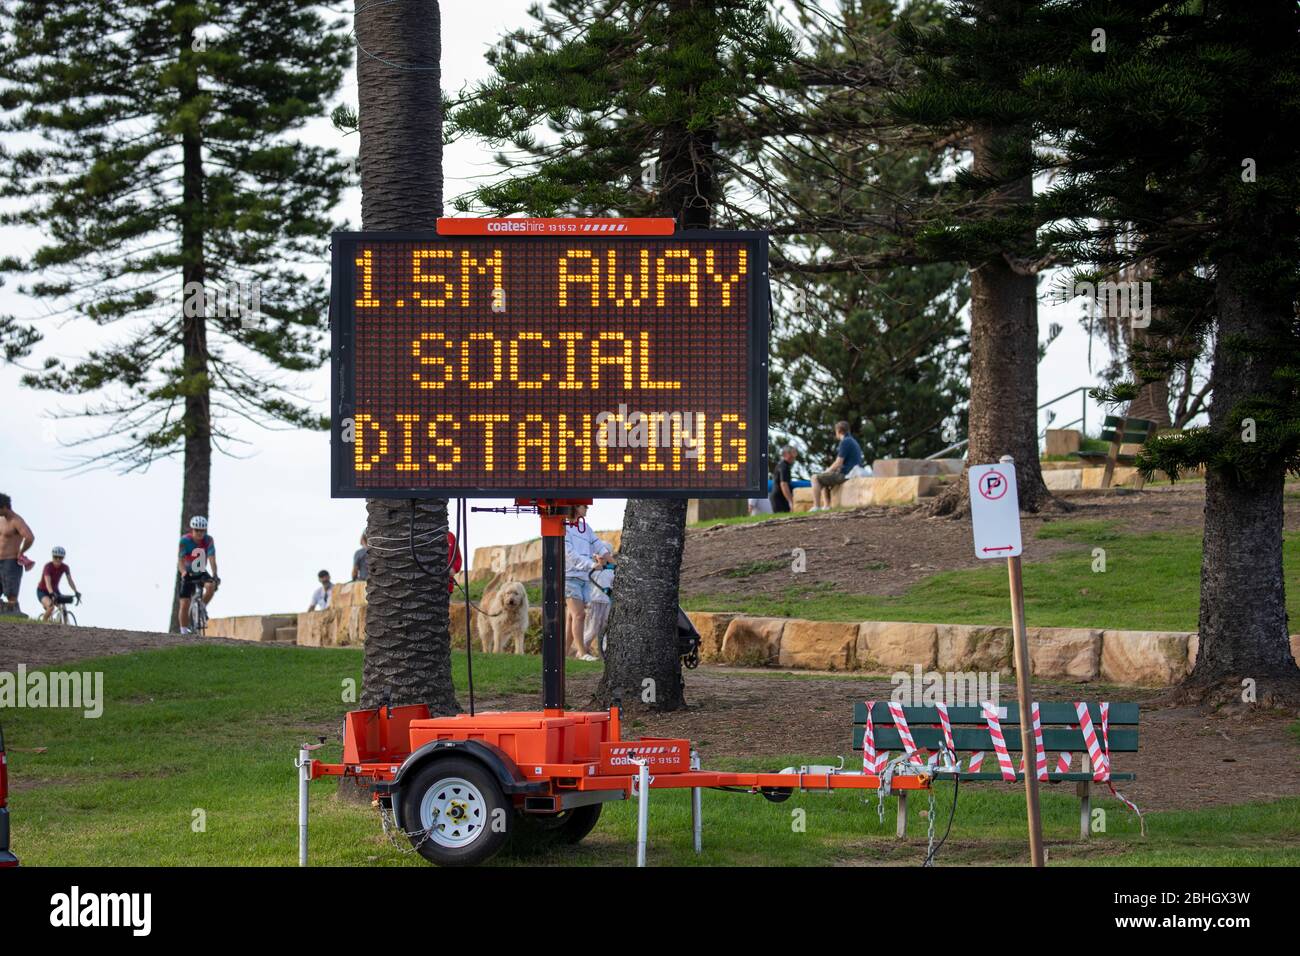 oronavirus Sydney, electronic sign at Avalon Beach in Sydney reminding people to maintain social distancing of 1.5 metres away,Australia Stock Photo